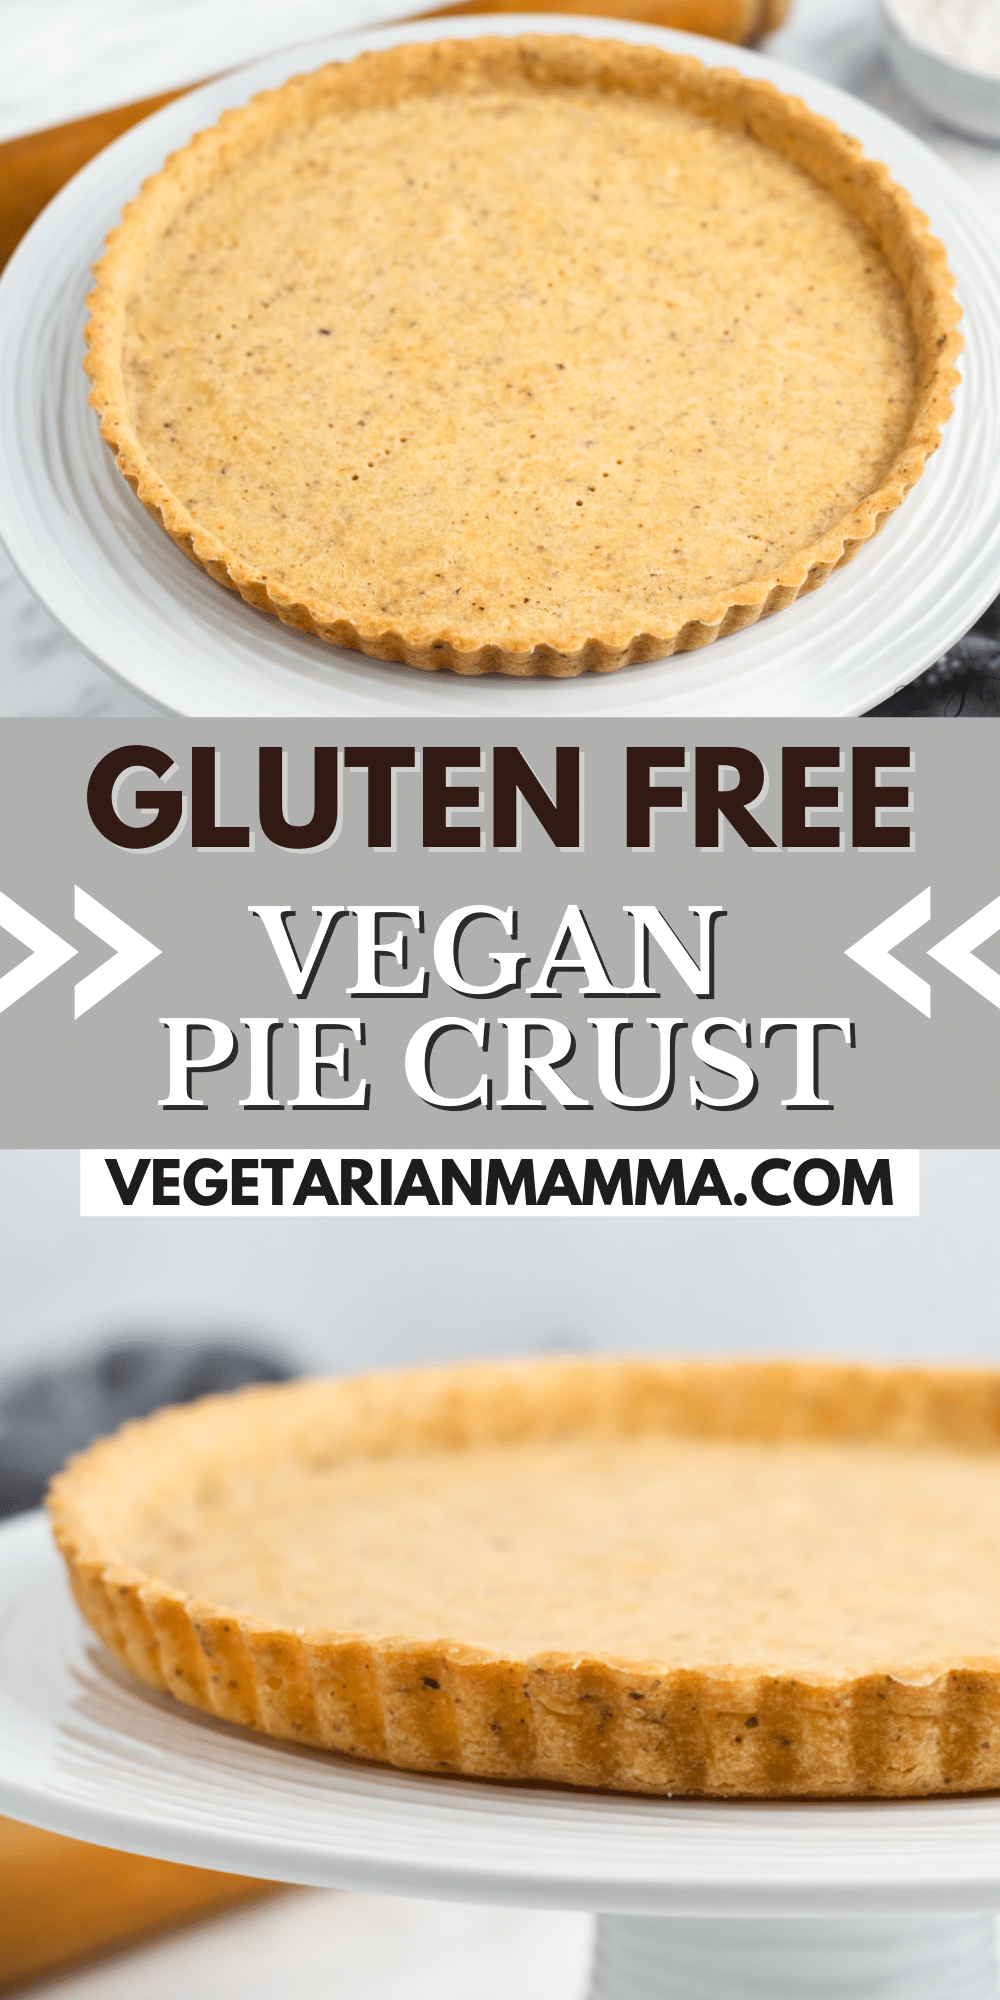 Vegan Pie Crust is flaky, buttery, and oh-so-easy with the food processor! Learn how to use this gluten-free pie crust recipe for delicious savory or sweet pies that don't take all day to make.